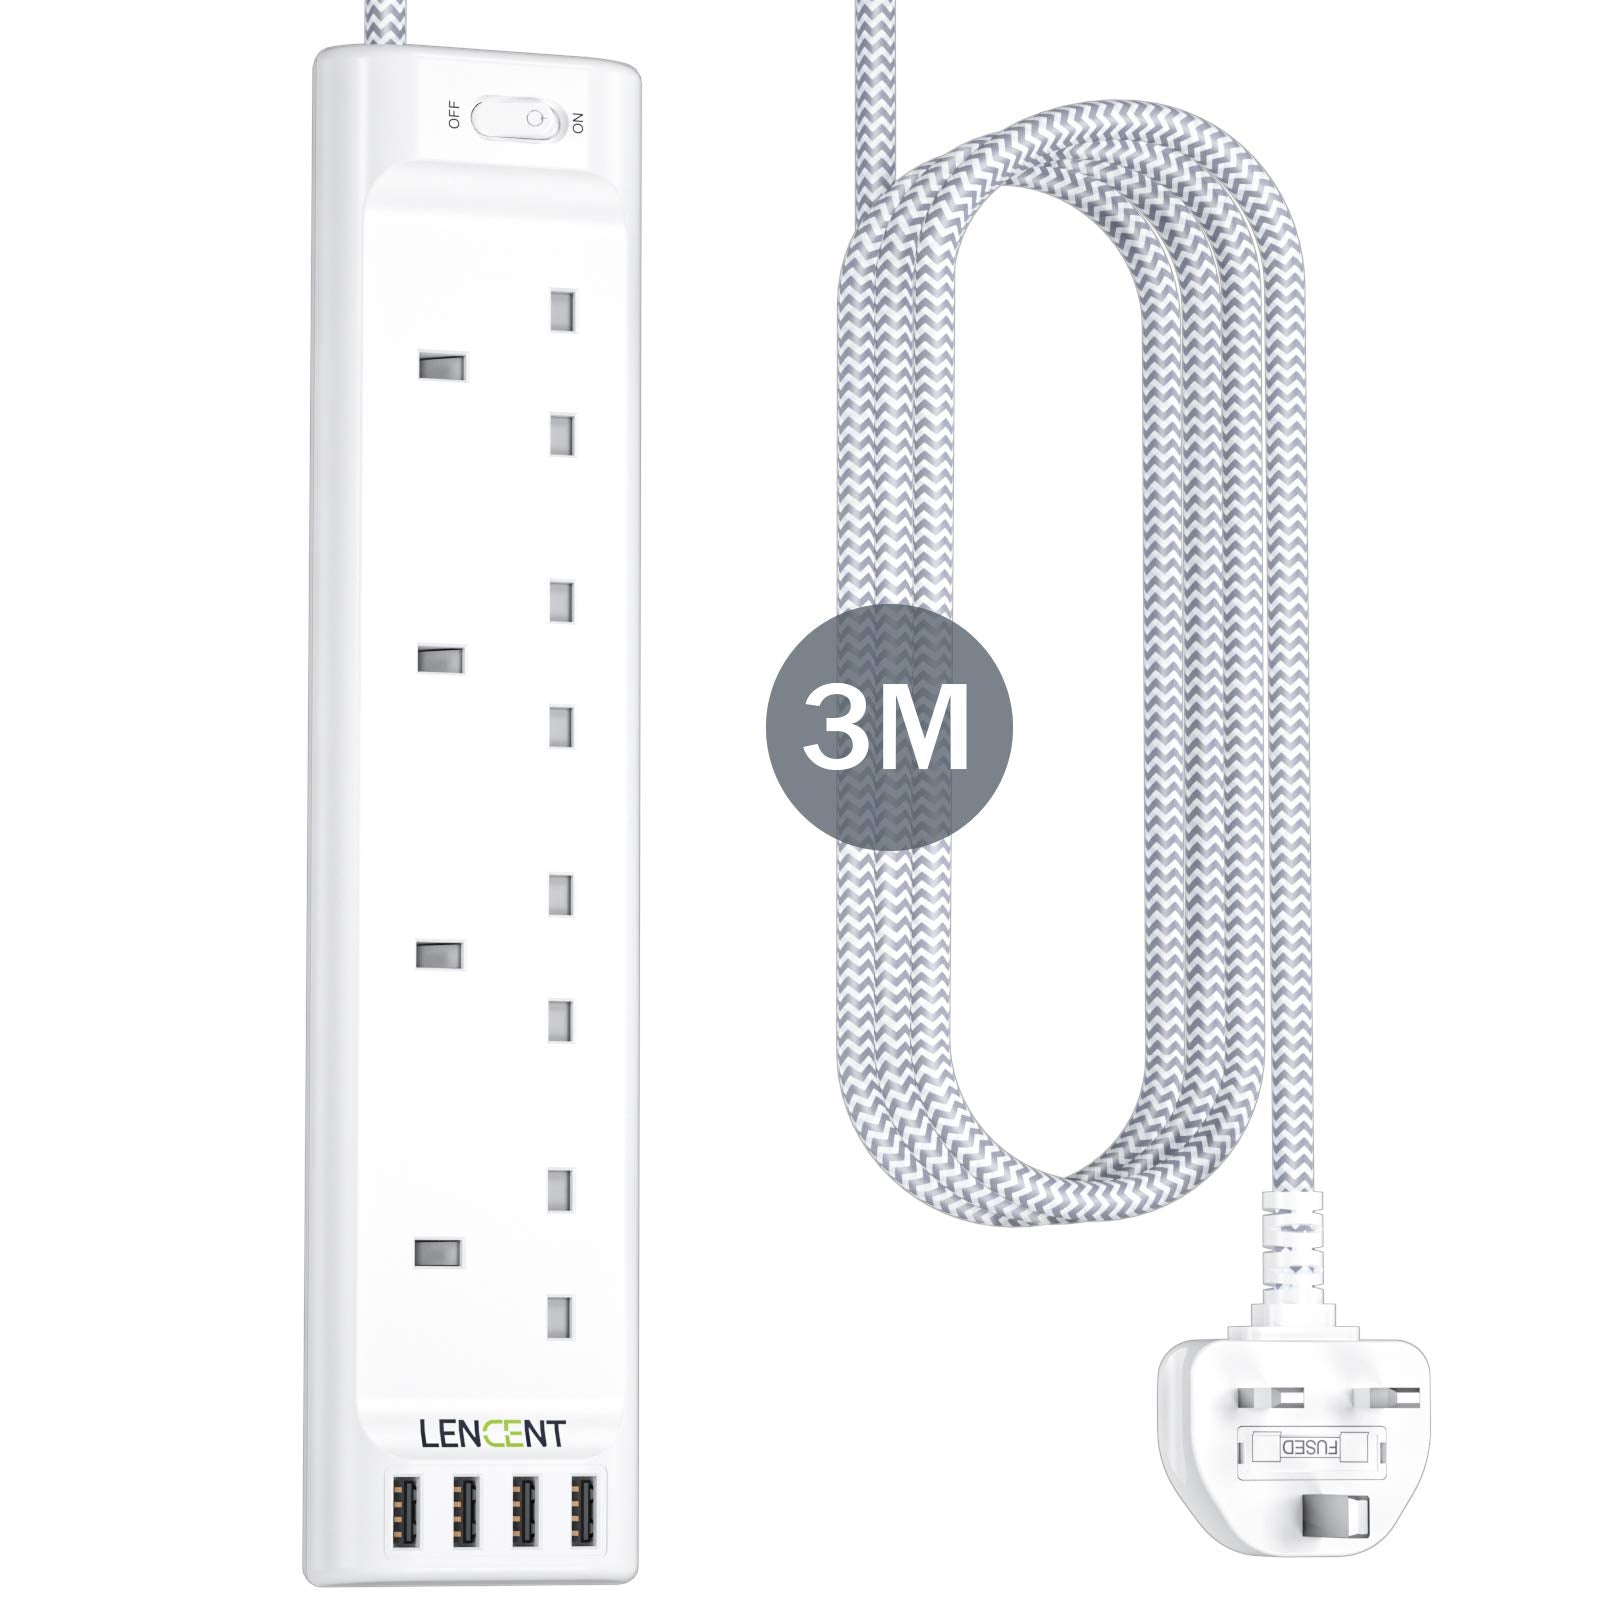 LENCENT 3M Extension Lead with USB Slots, 4 Way Outlets Power Strip with 4 USB Ports, Multi Power Plug Extension with 3M Braided Extension Cord for Home Office, 3250W 13A